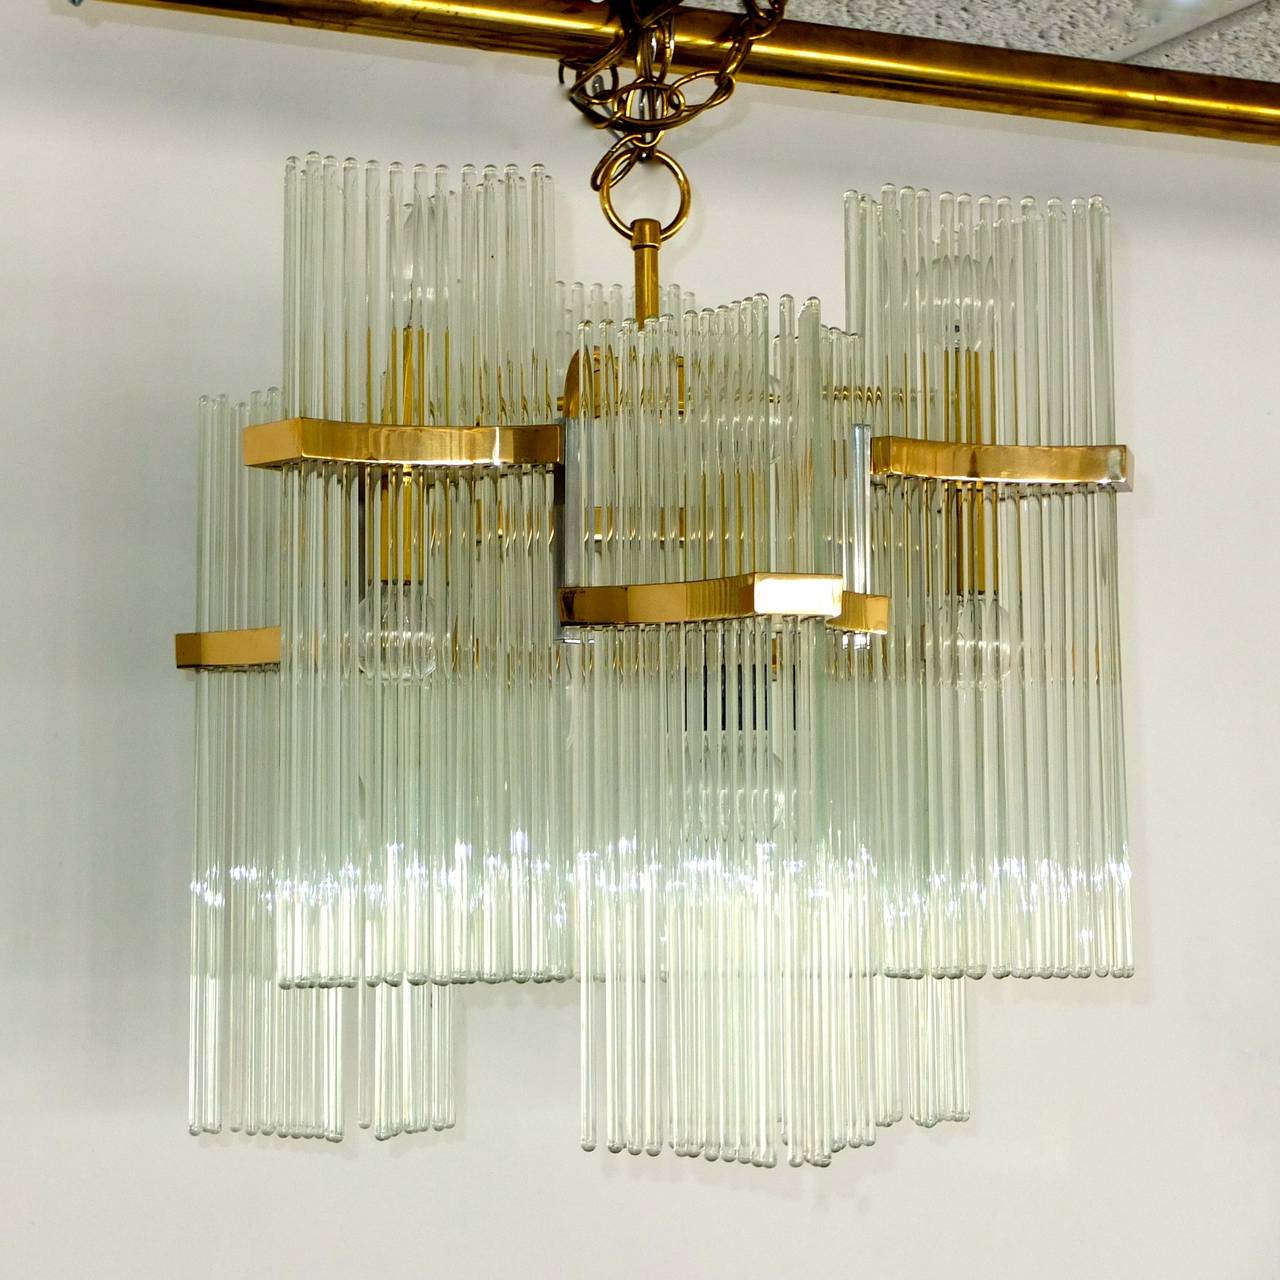 Glamorous 1970's chandelier by Gaetano Sciolari for Lightolier.  Substantial polished brass frame with six staggered triangular form clusters of suspended 16 inch glass rods which produce a blingy ambiance.  The 12 bulbs (60 watts each) provide